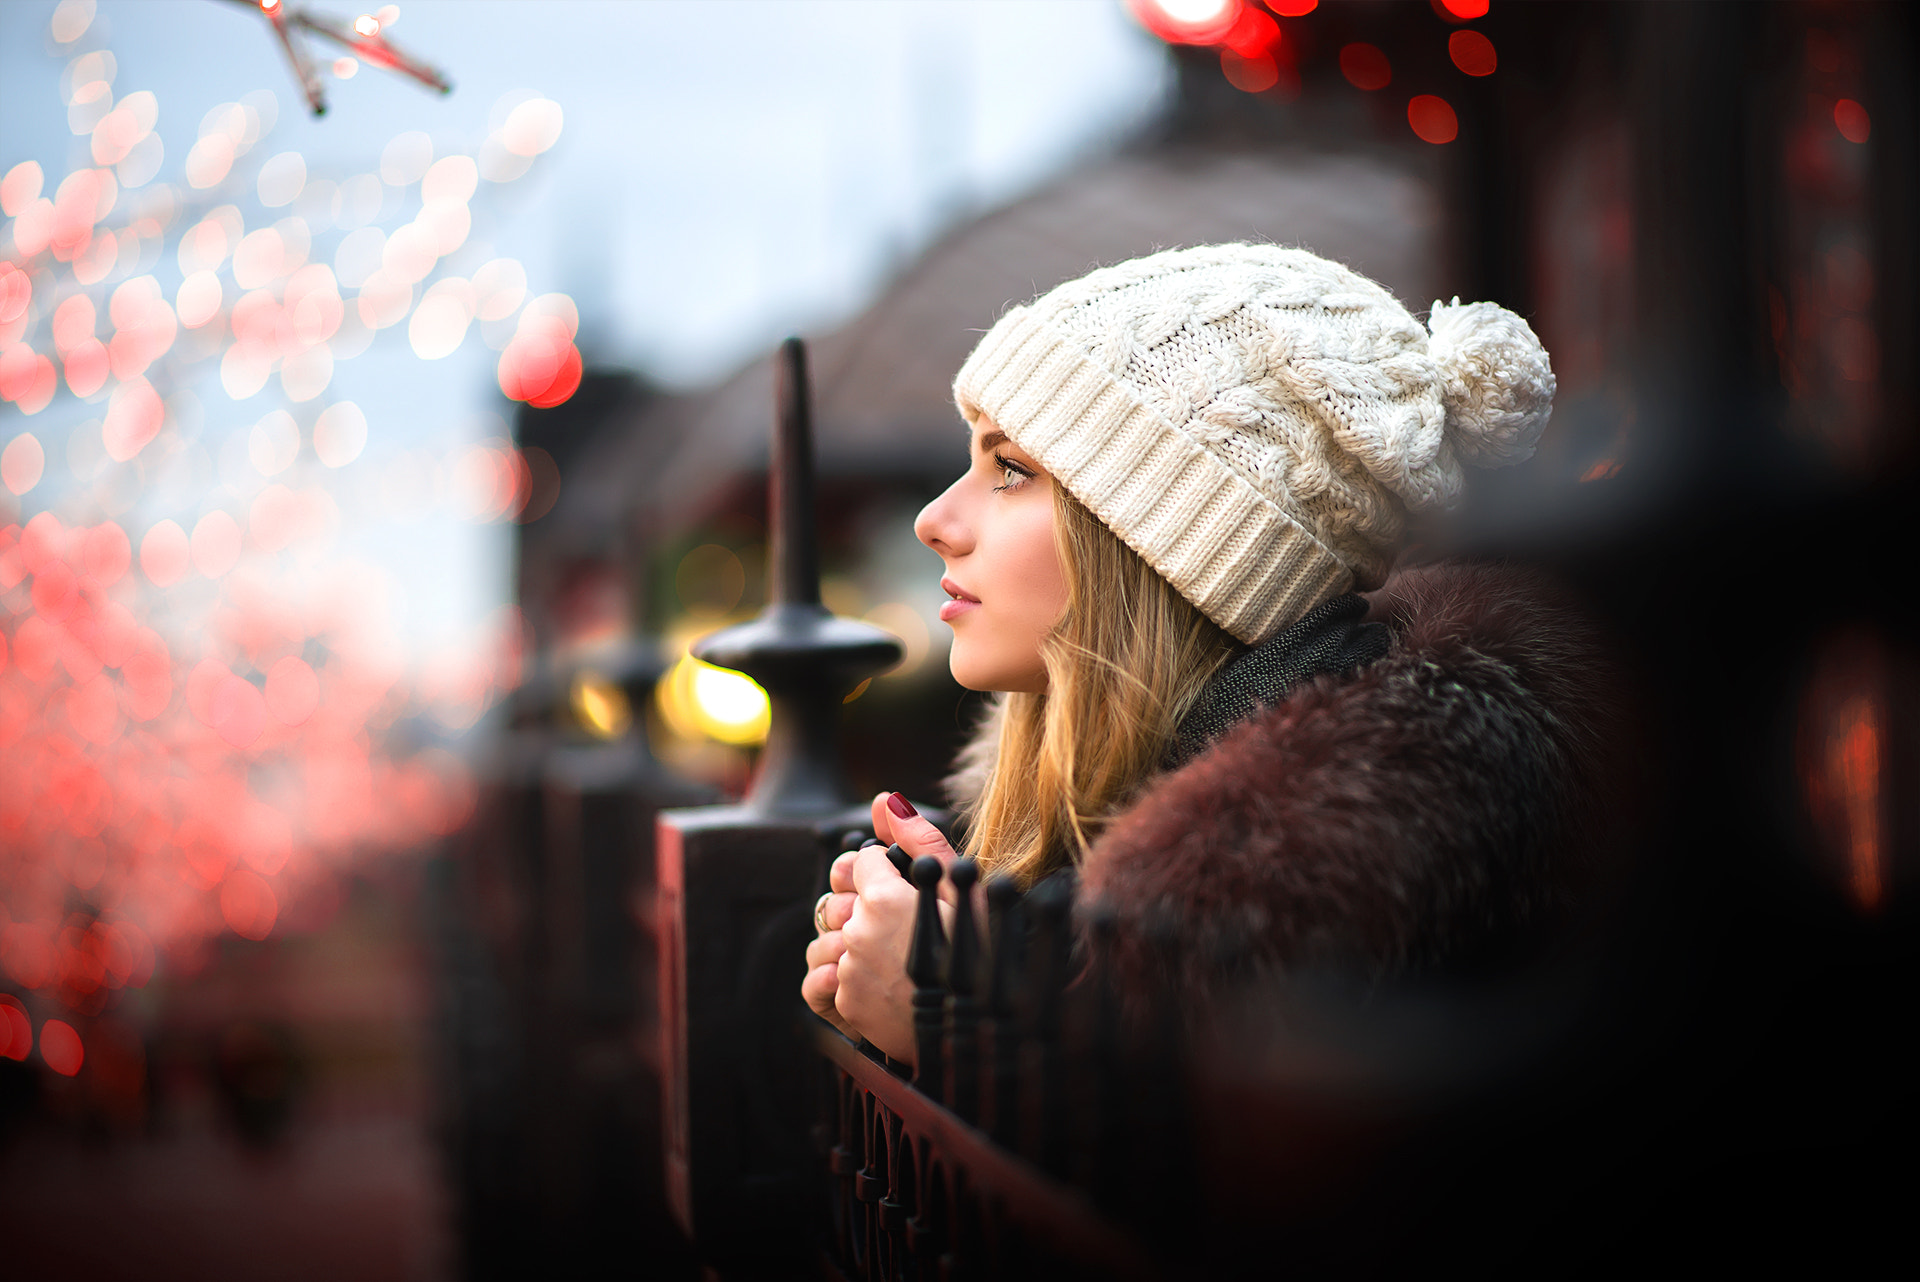 People 1920x1282 women blonde hat blue eyes women outdoors face portrait bokeh lights winter profile fur coats Anton Mayorov looking into the distance red nails wool cap white cap side view young women